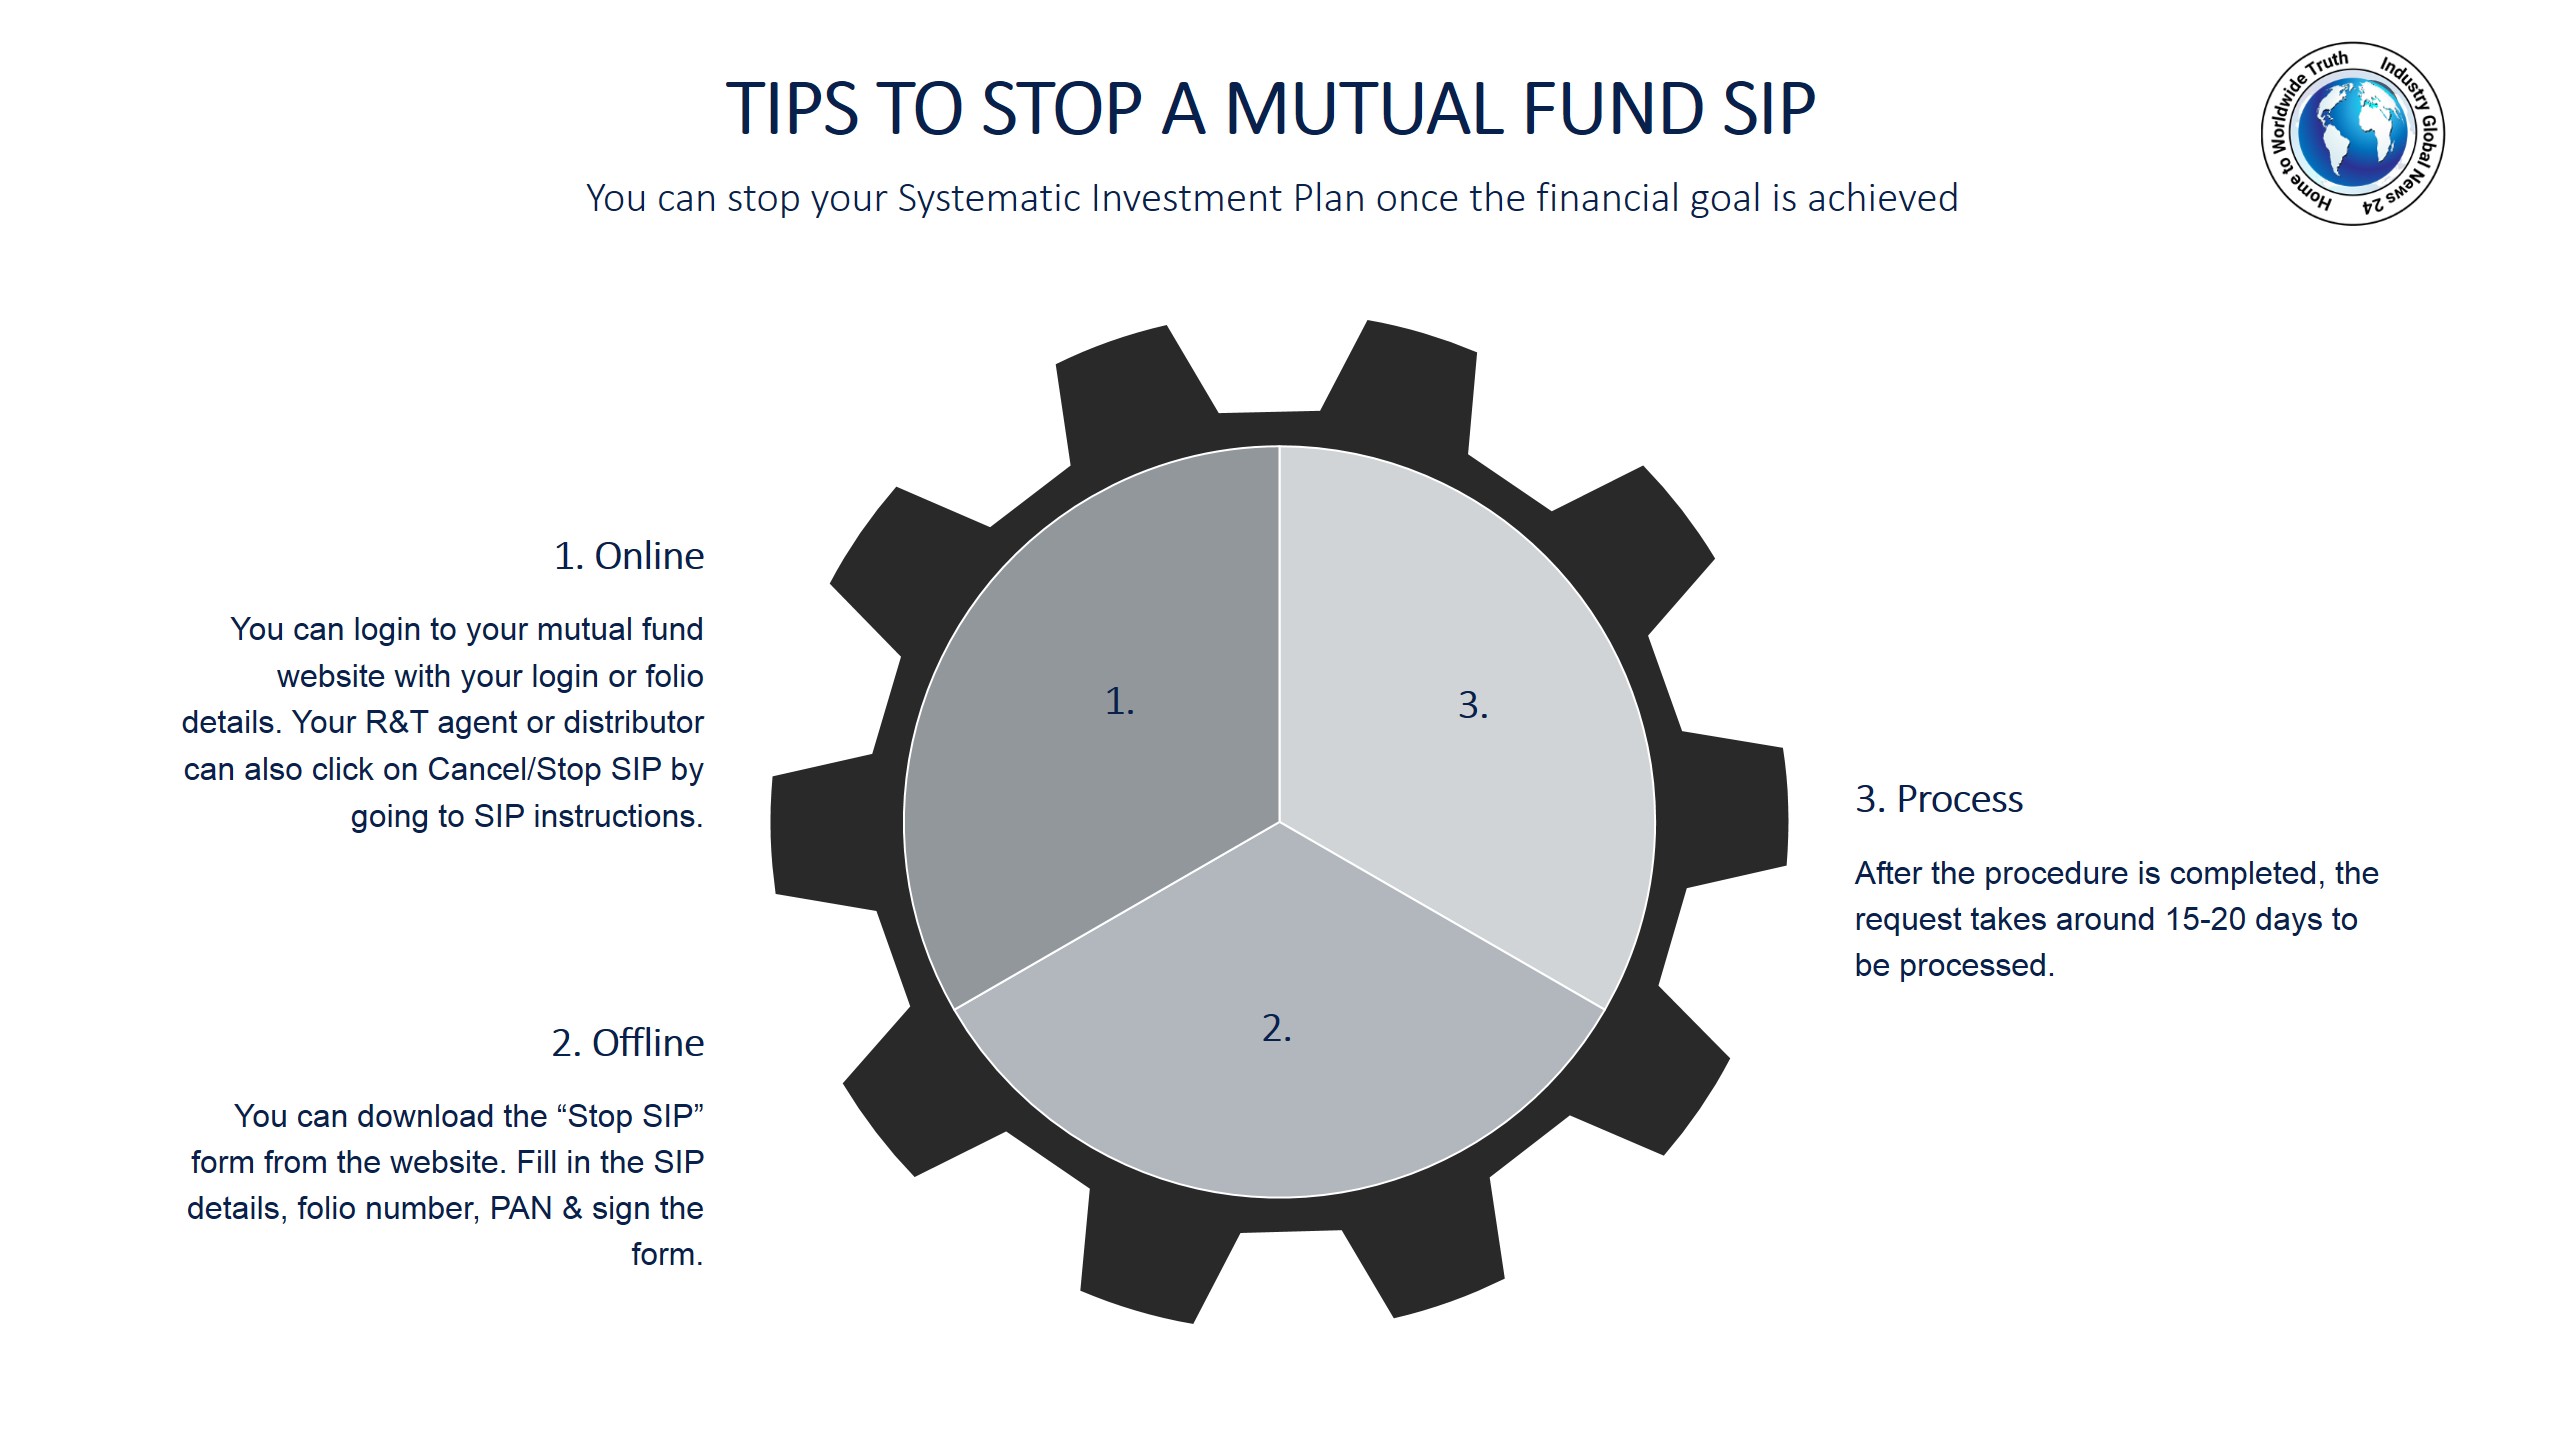 Tips to stop a mutual fund SIP 